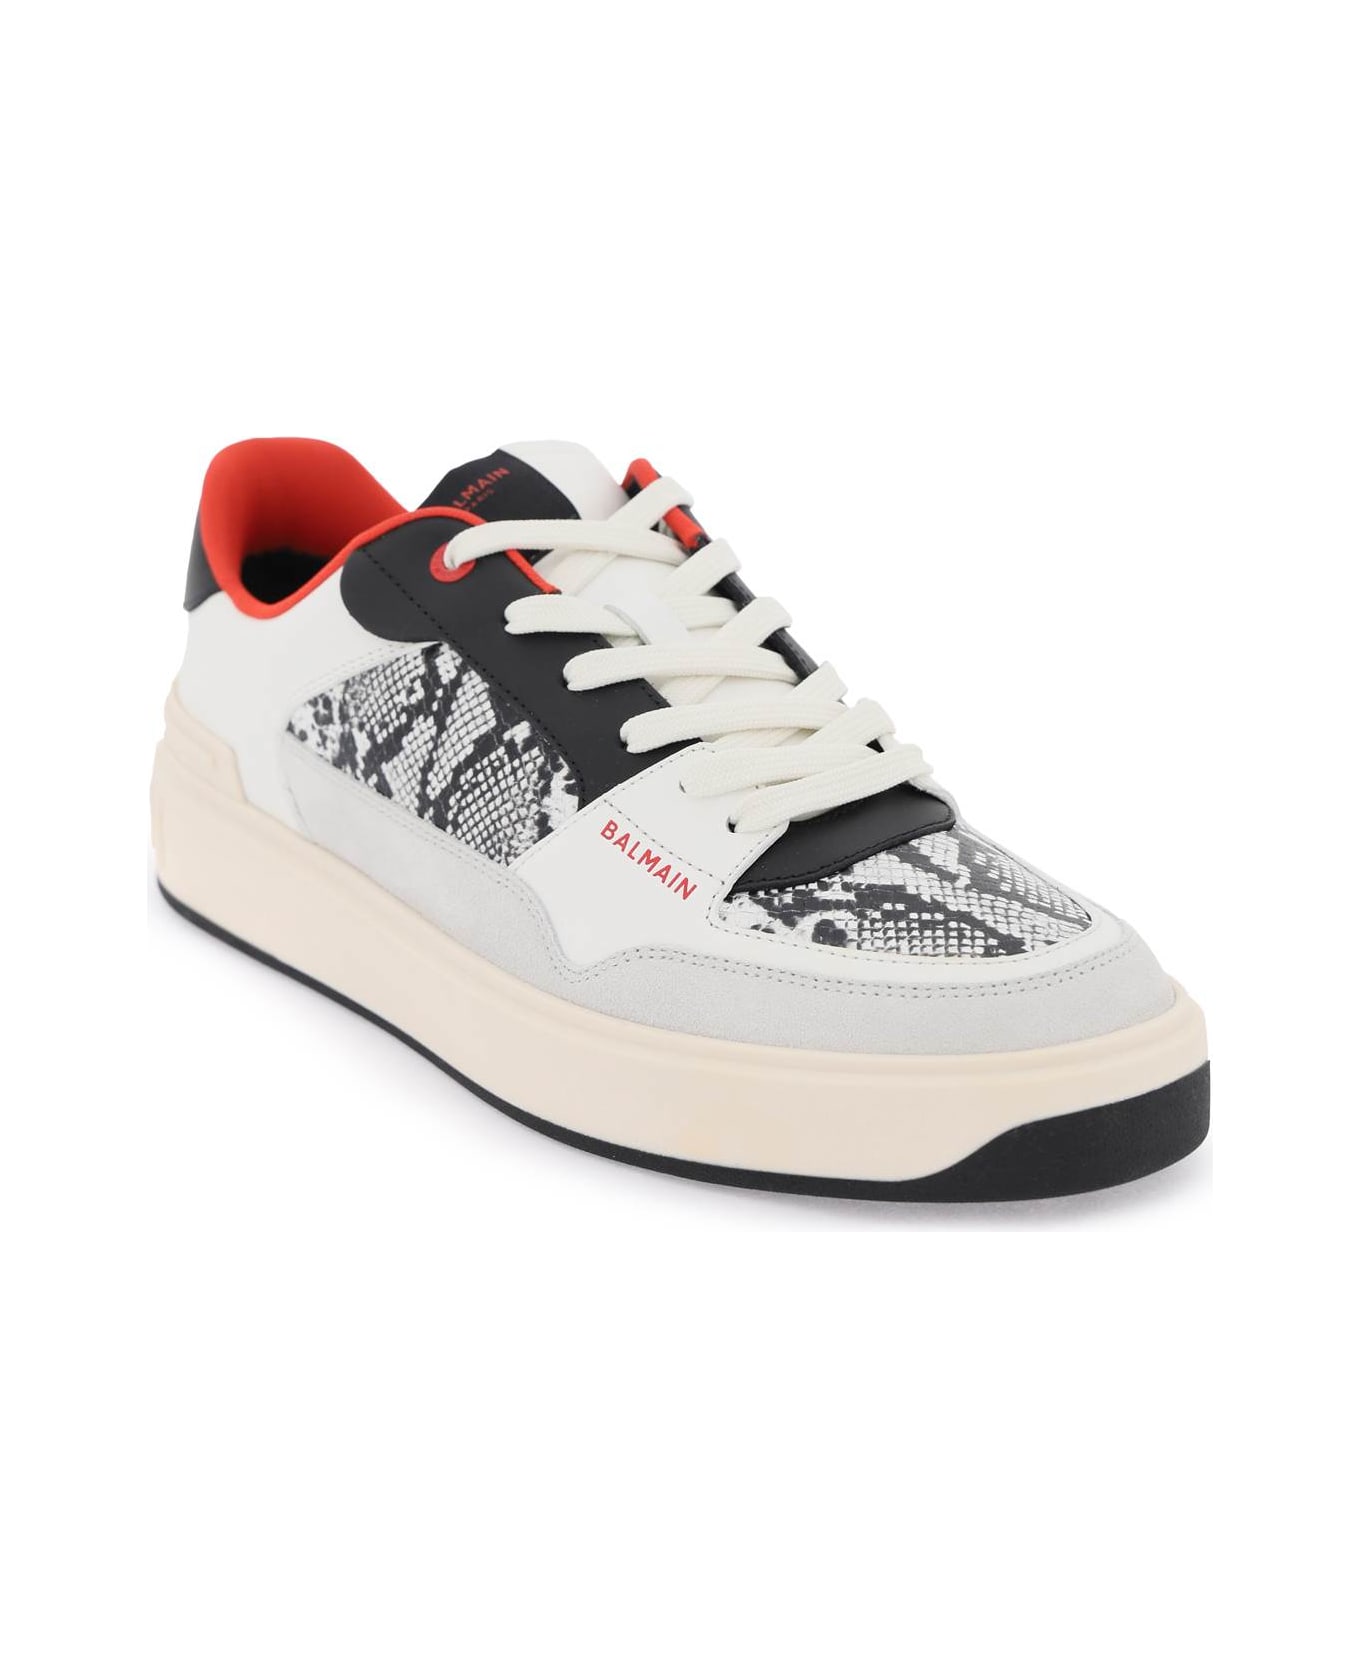 Balmain B-court Flip Sneakers In Python-effect Leather - GRIS ROUGE VIF (White)